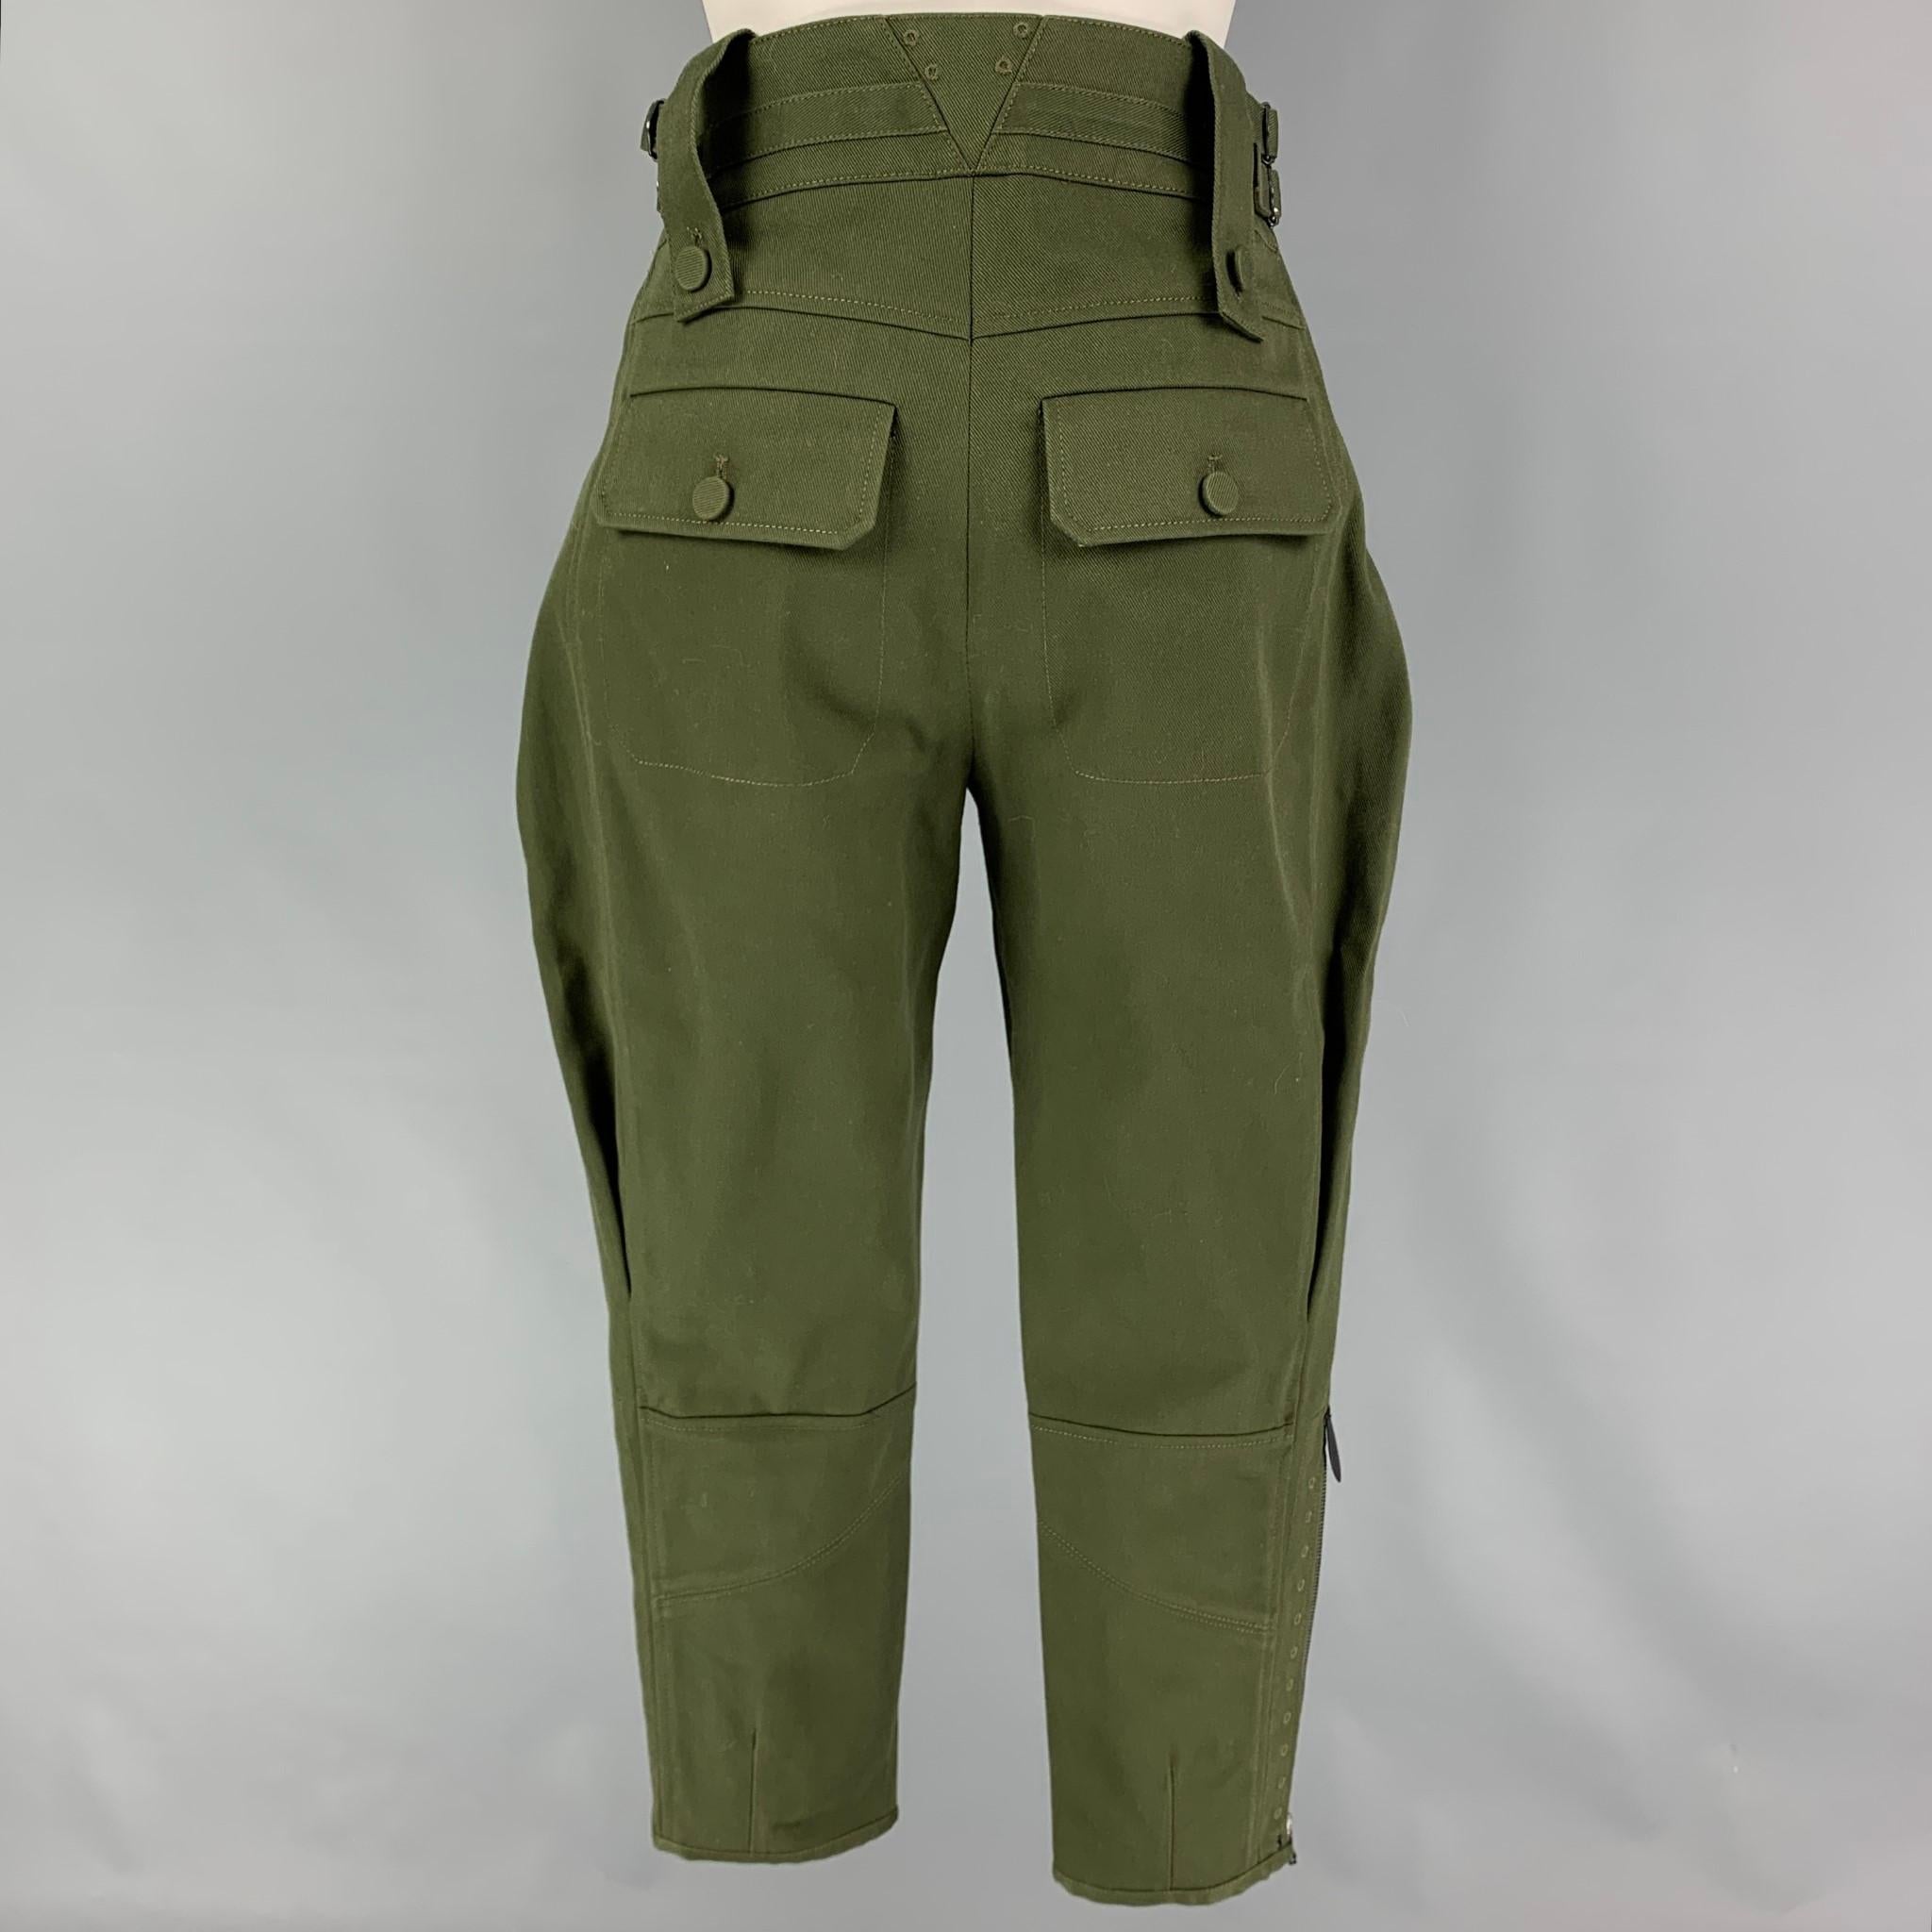 LOUIS VUITTON 'Tailored Jodhpurs' pants comes in a olive cotton / polyester featuring a calf-length jodhpurs design, adjustable high waist, gold tone trim buttons, side zippers, LV canvas tab detail, and a button fly closure. Made in